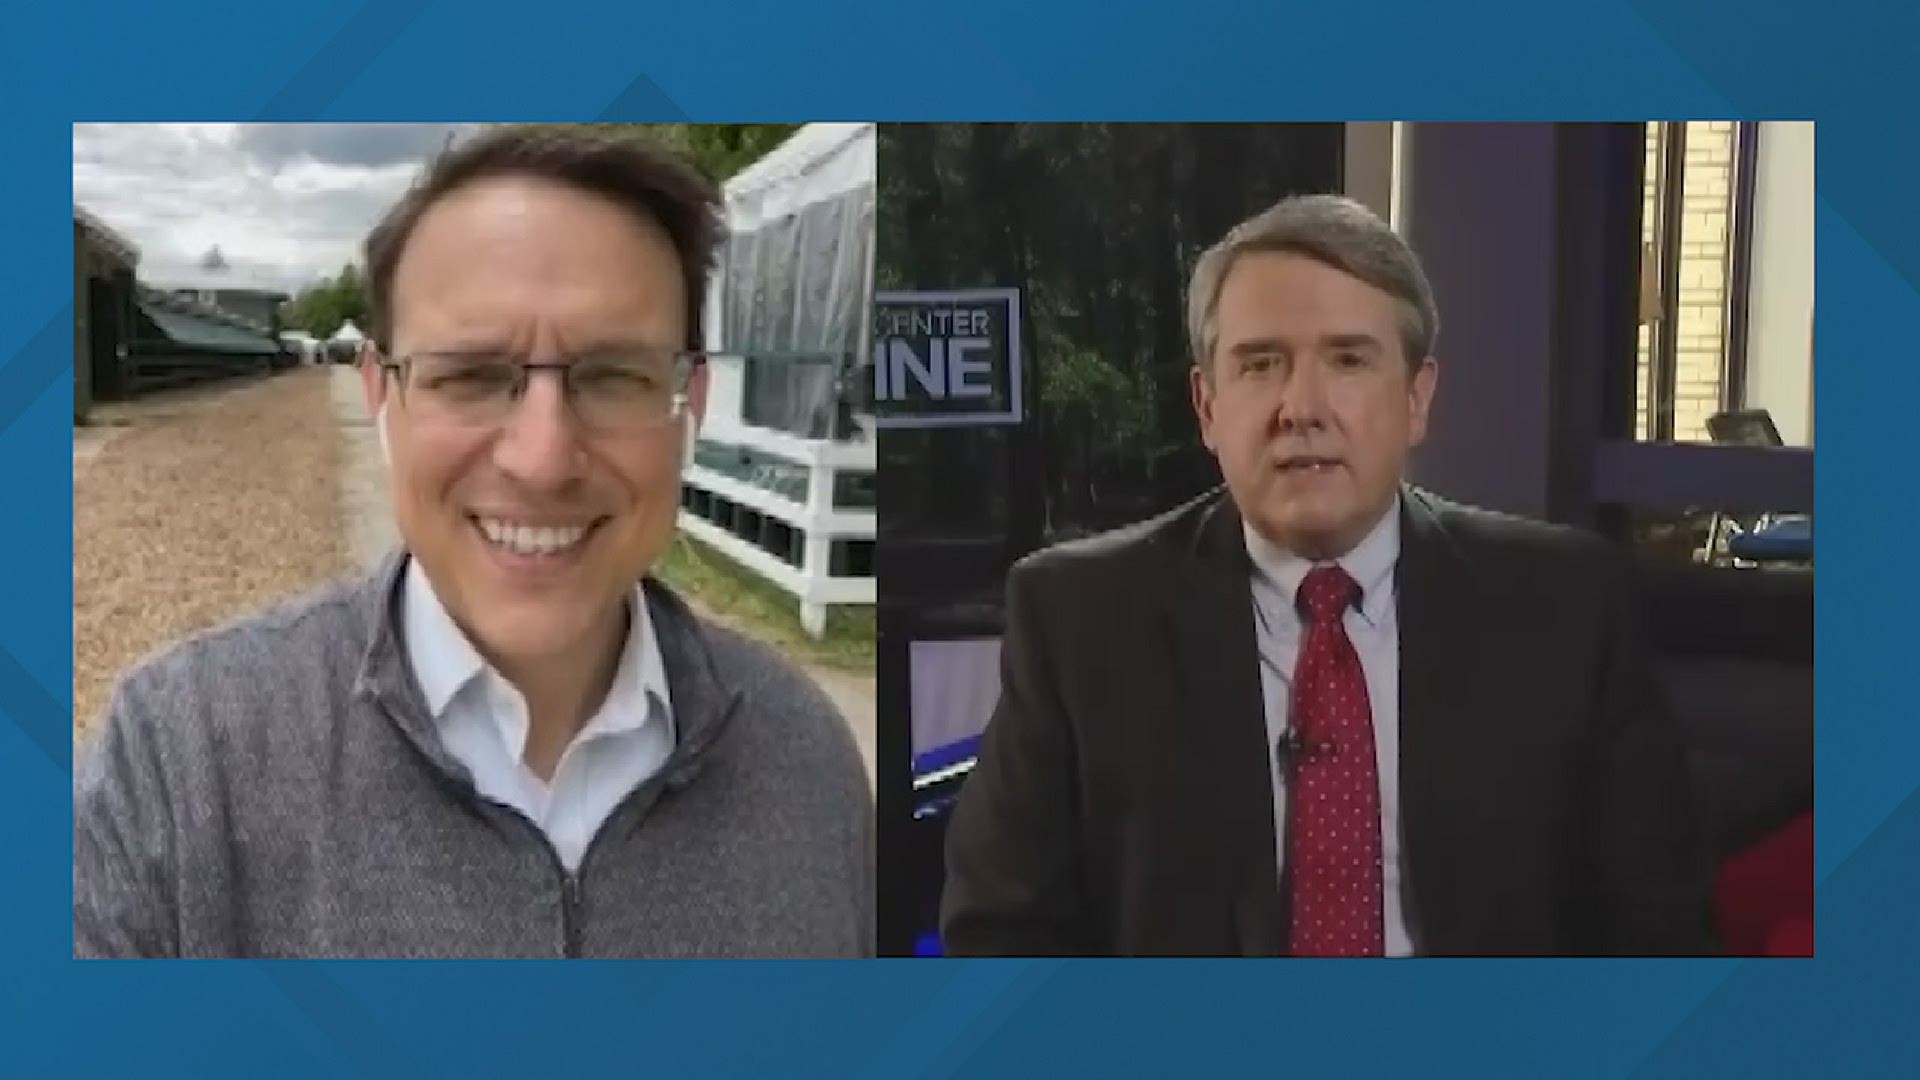 NBC's Steve Kornacki talks to Pat Callaghan about the Preakness and Kornacki's time at Scarborough Downs picking races as a child